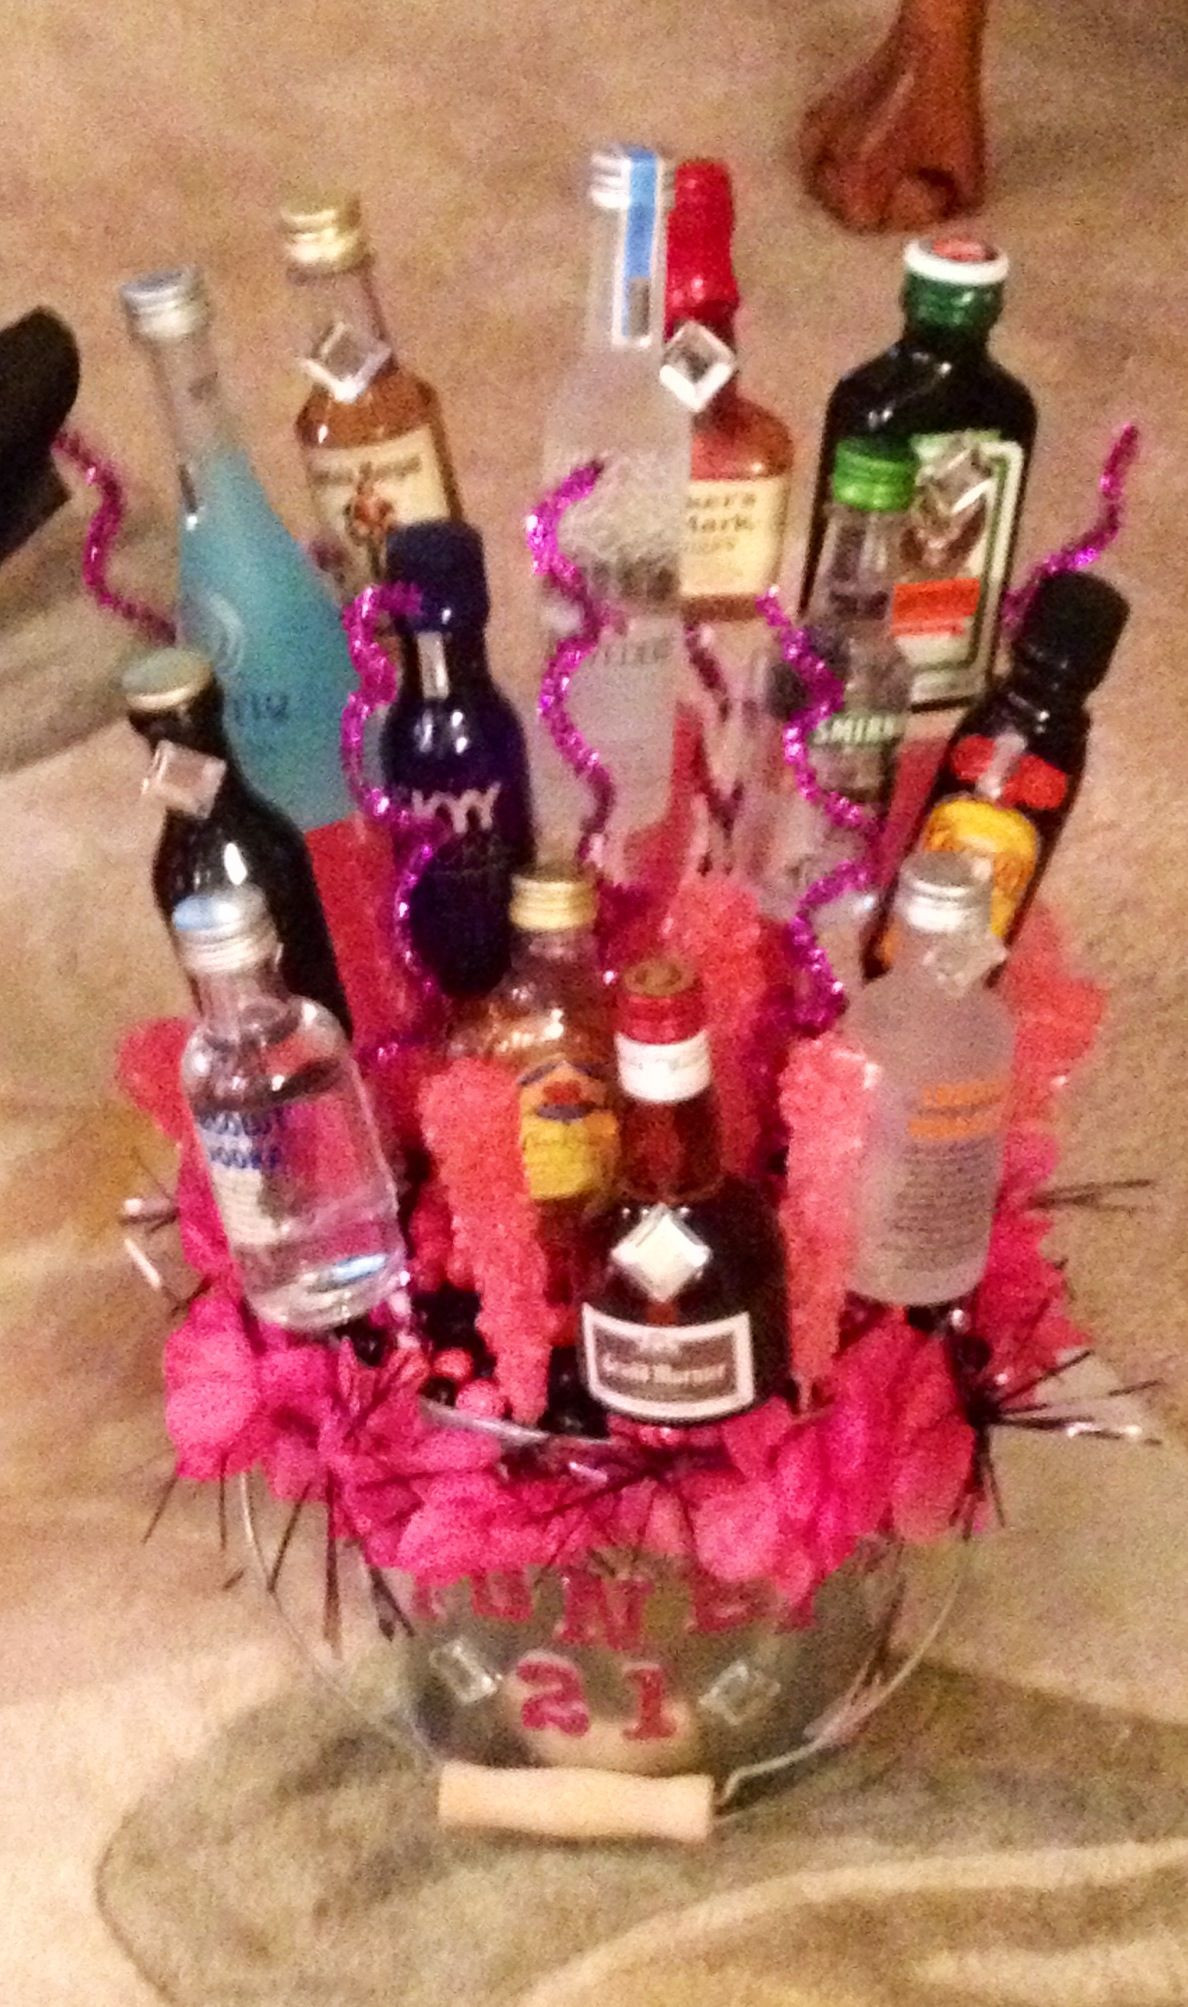 Birthday Gift Baskets For Her
 Made an edible alcohol basket for my dear friend for her